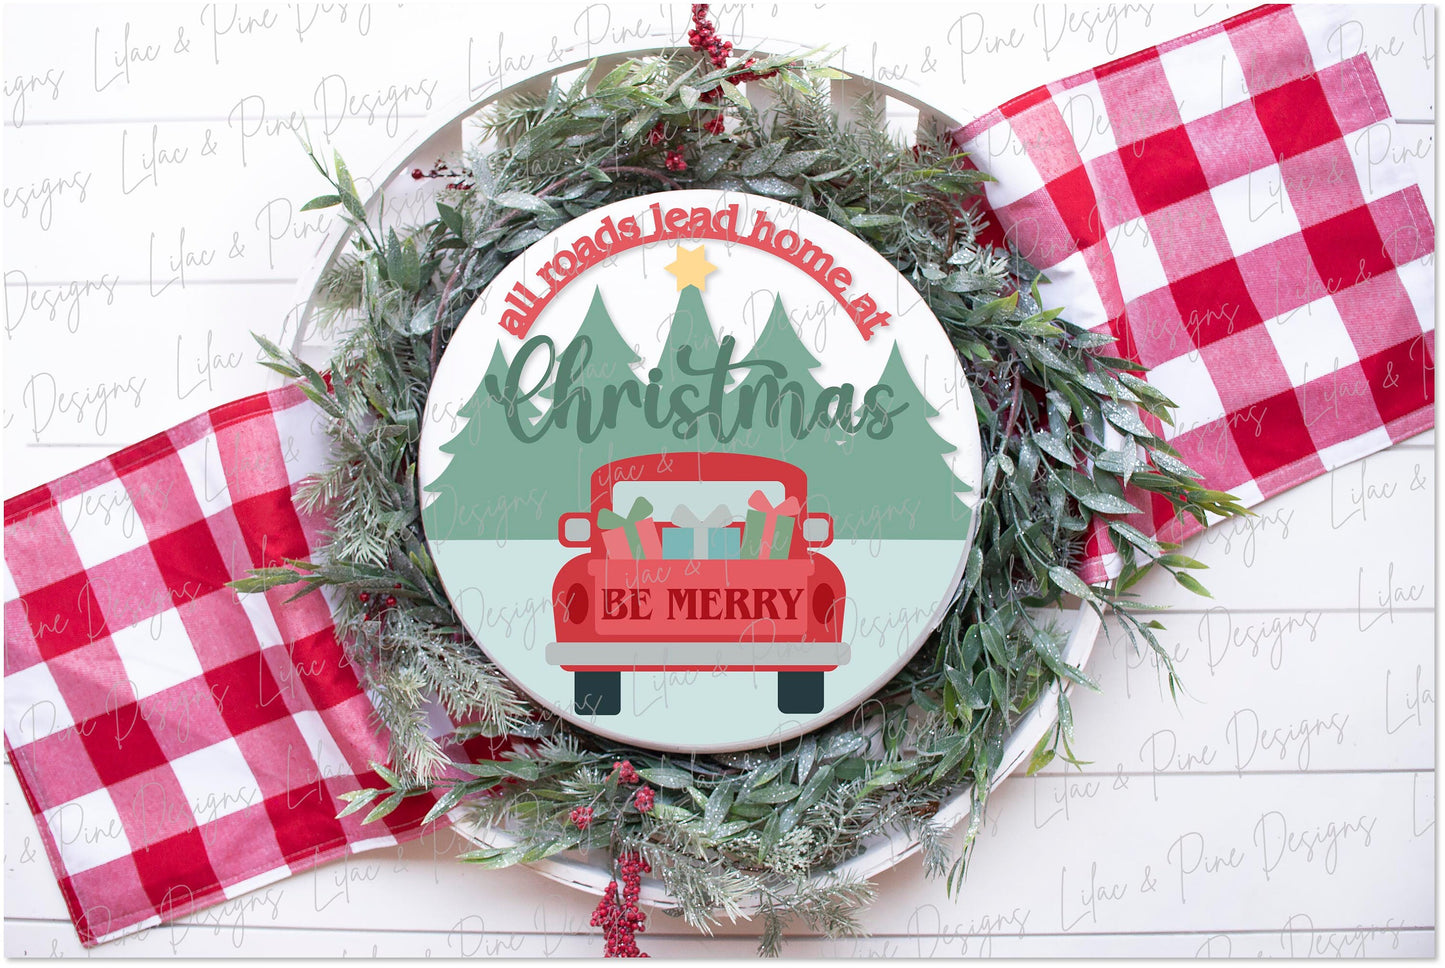 All Roads Lead Home at Christmas SVG, Holiday door hanger, Vintage Christmas truck SVG, Holiday welcome, Glowforge Svg, laser cut file